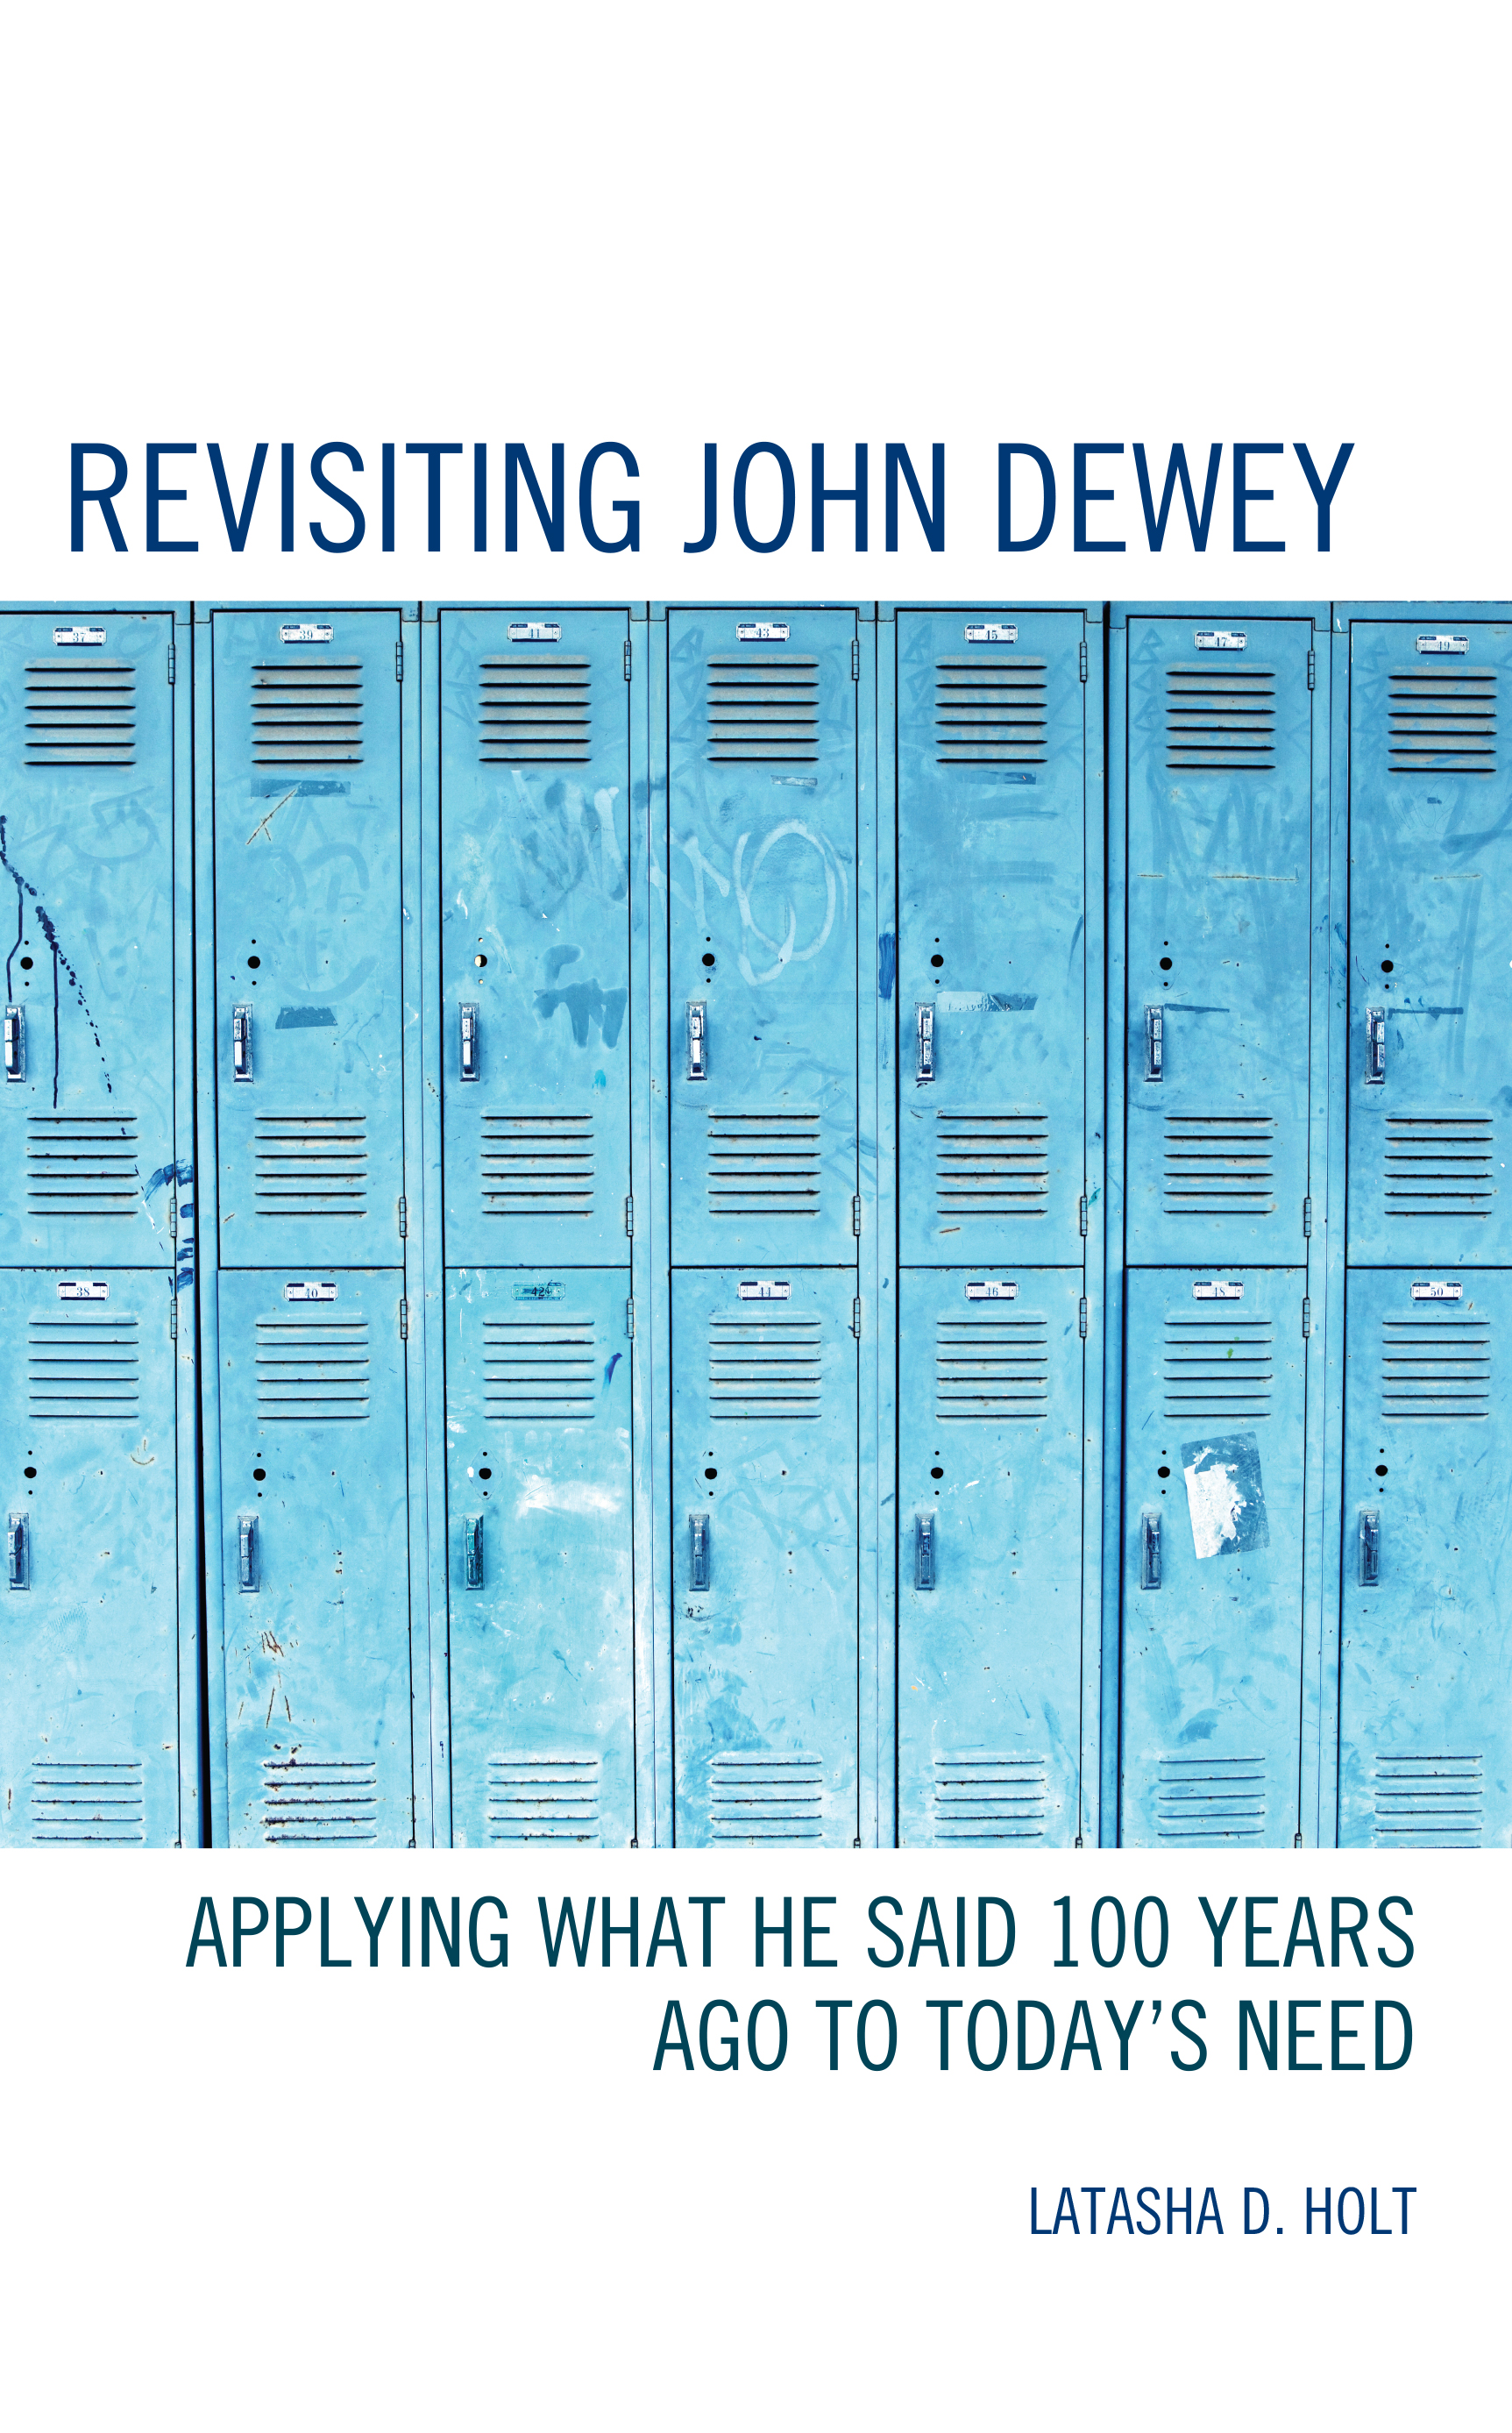 Revisiting John Dewey: Applying What He Said 100 Years Ago to Today’s Need